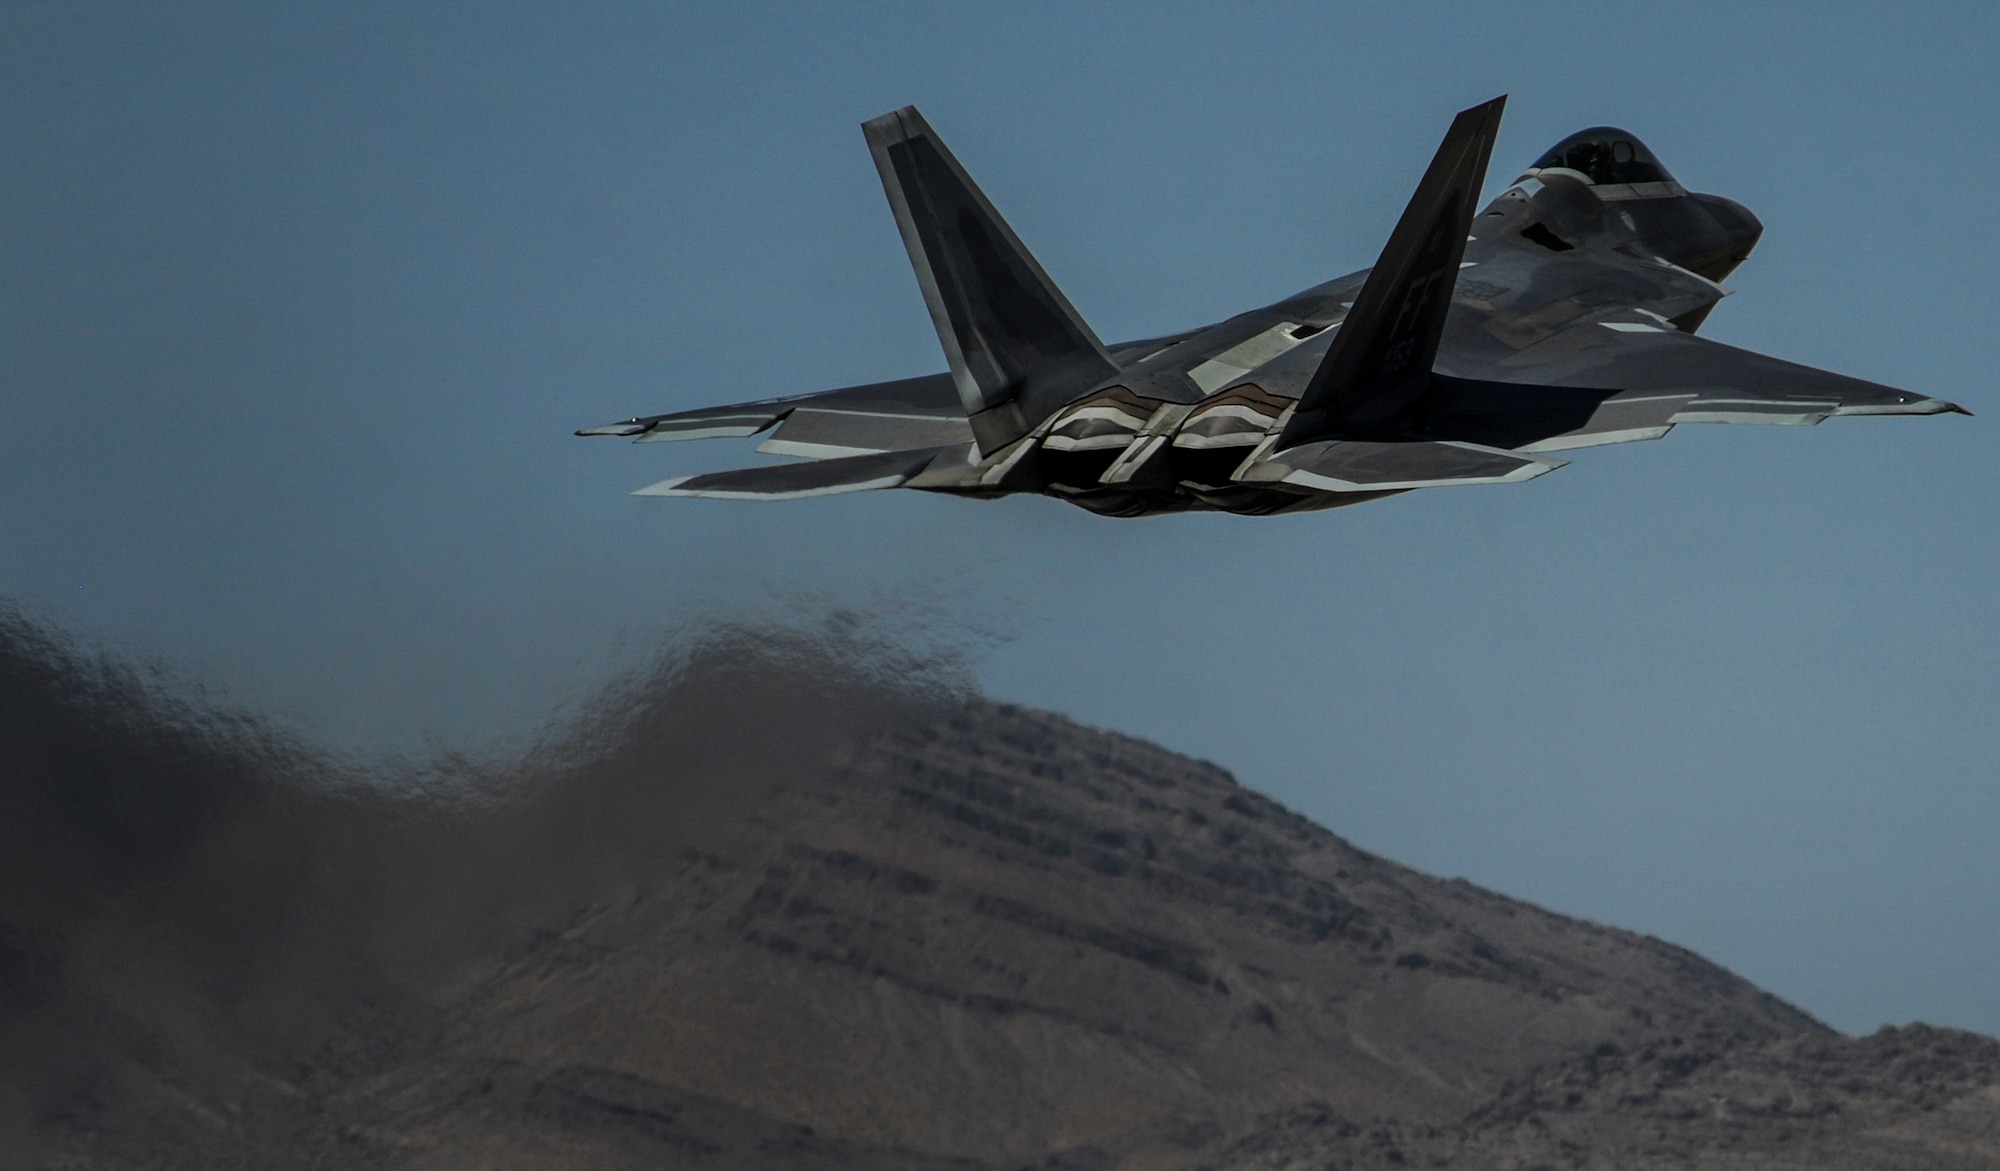 An F-22A Raptor, assigned to the 27th Fighter Squadron, Joint Base Langley-Eustis, Va., takes off during the operations of Red Flag 16-3, July 11, 2016. Aircraft and personnel deploy to Nellis AFB for Red Flag under Air Expeditionary Force concept and make up the exercise’s “blue” forces. (U.S. Air Force photo by Airman 1st Class Kevin Tanenbaum/Released)